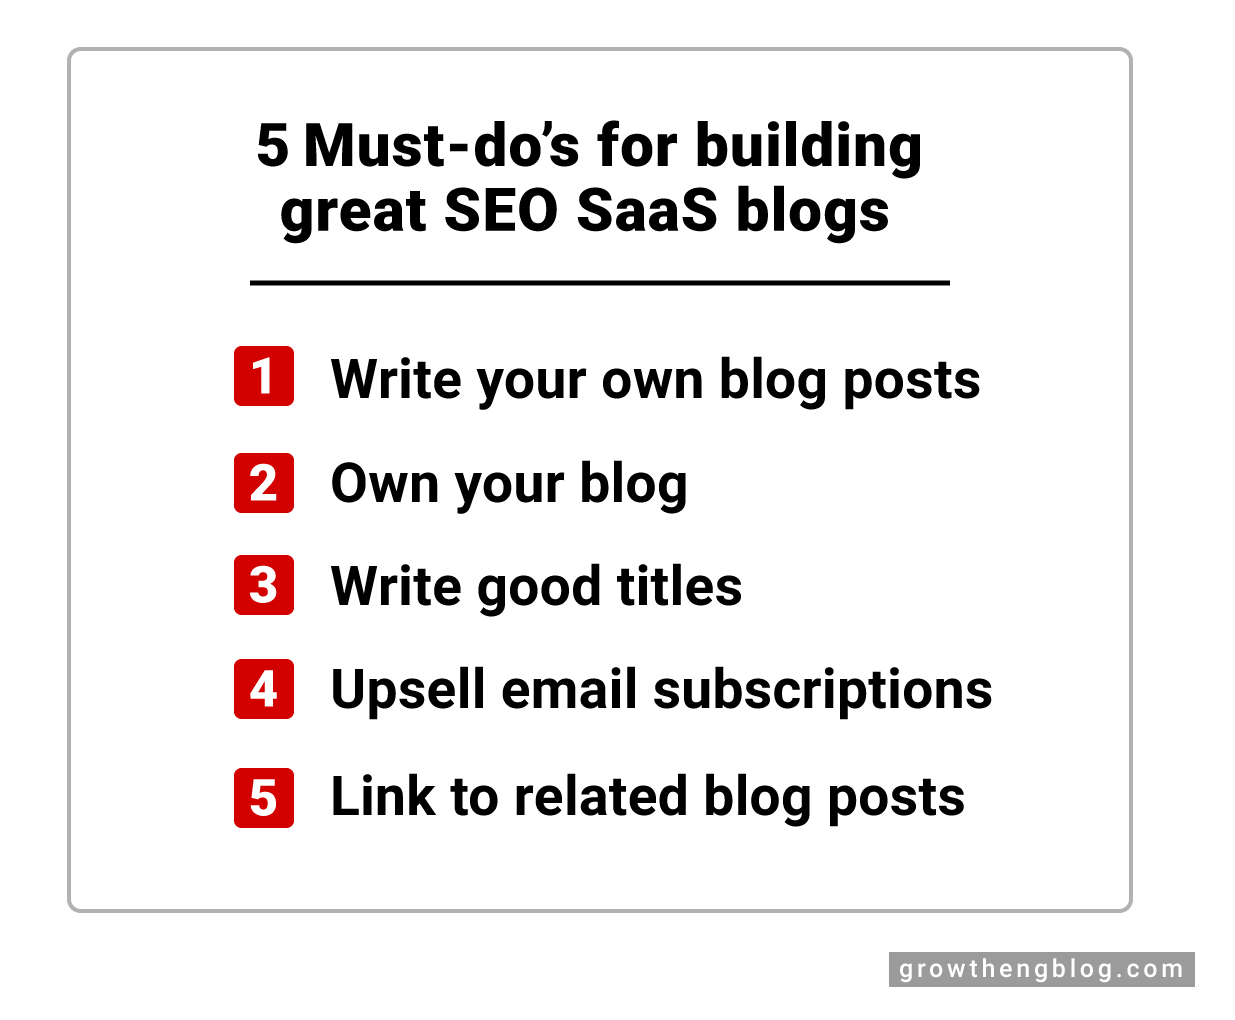 5 Must-do's for building great SaaS SEO blogs